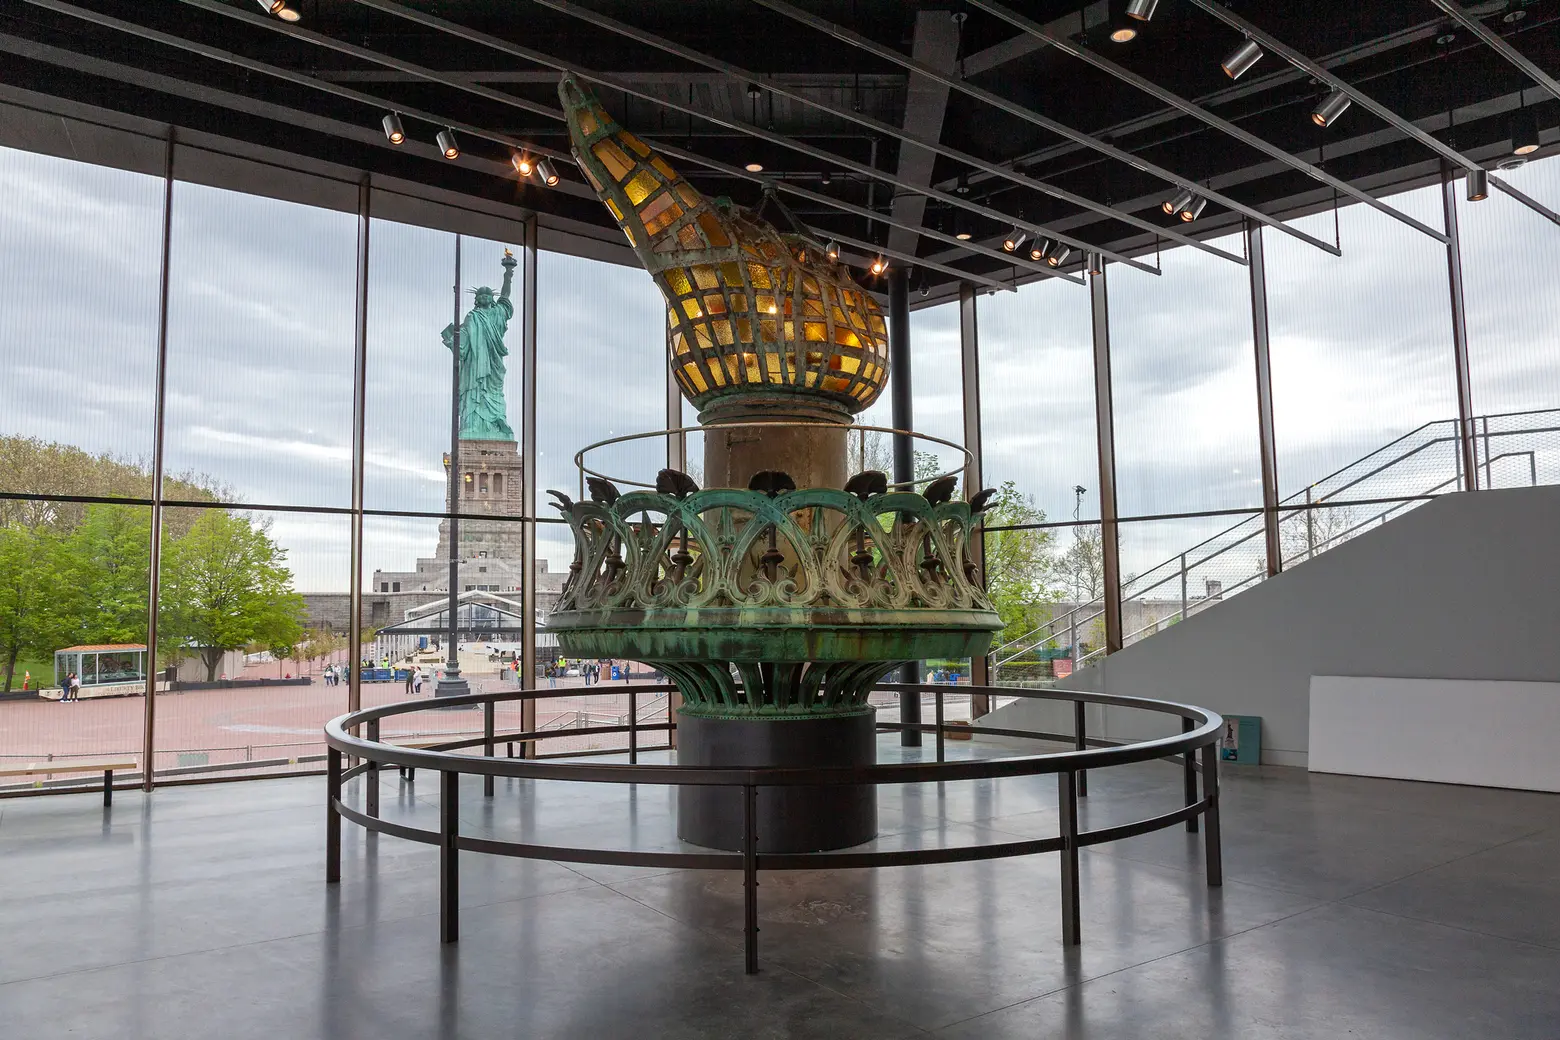 See inside the Statue of Liberty’s new museum ahead of this week’s opening